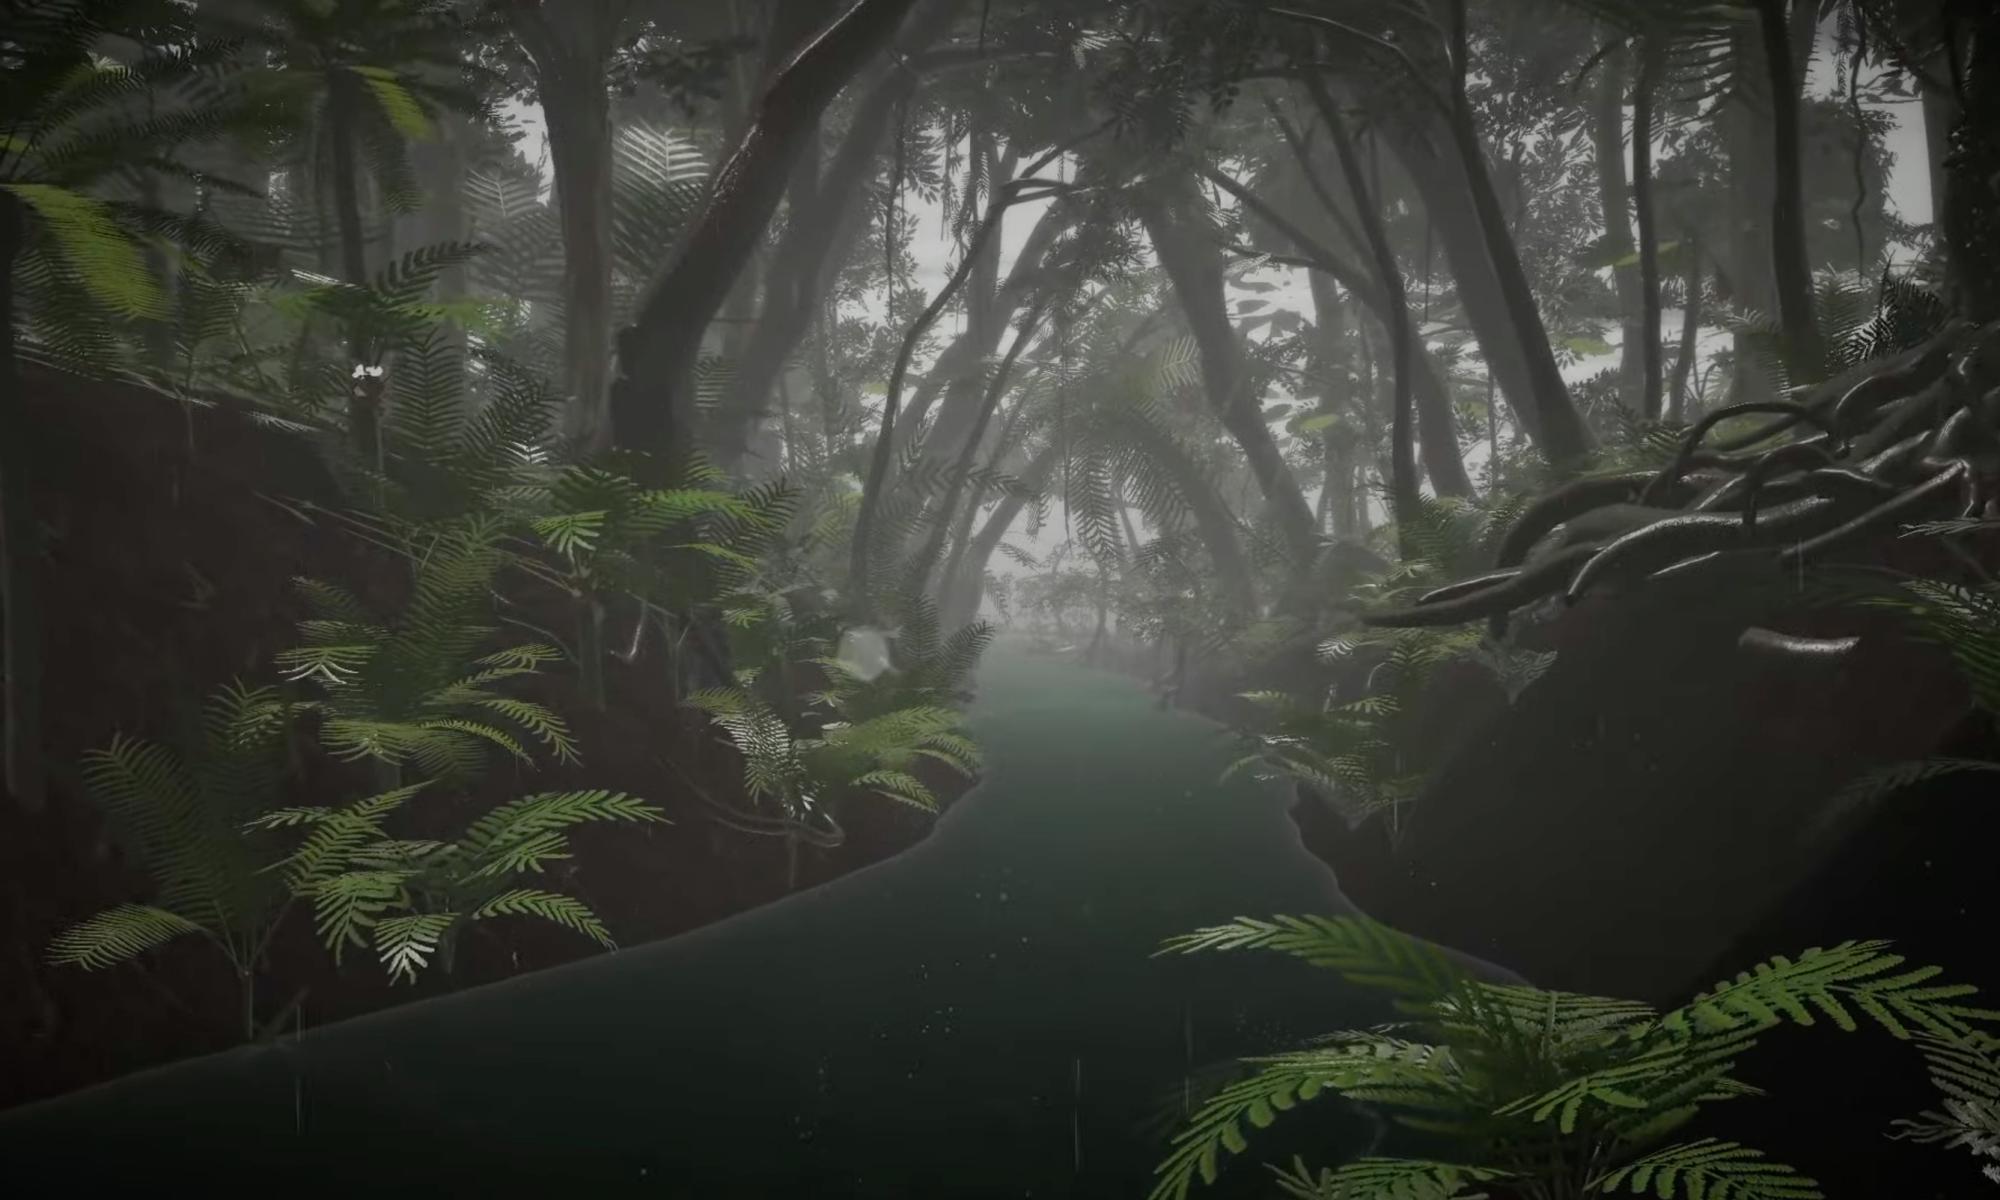 100 years in 24 hours: the ‘epic’ VR film Gondwana is set in the world’s oldest tropical rainforest